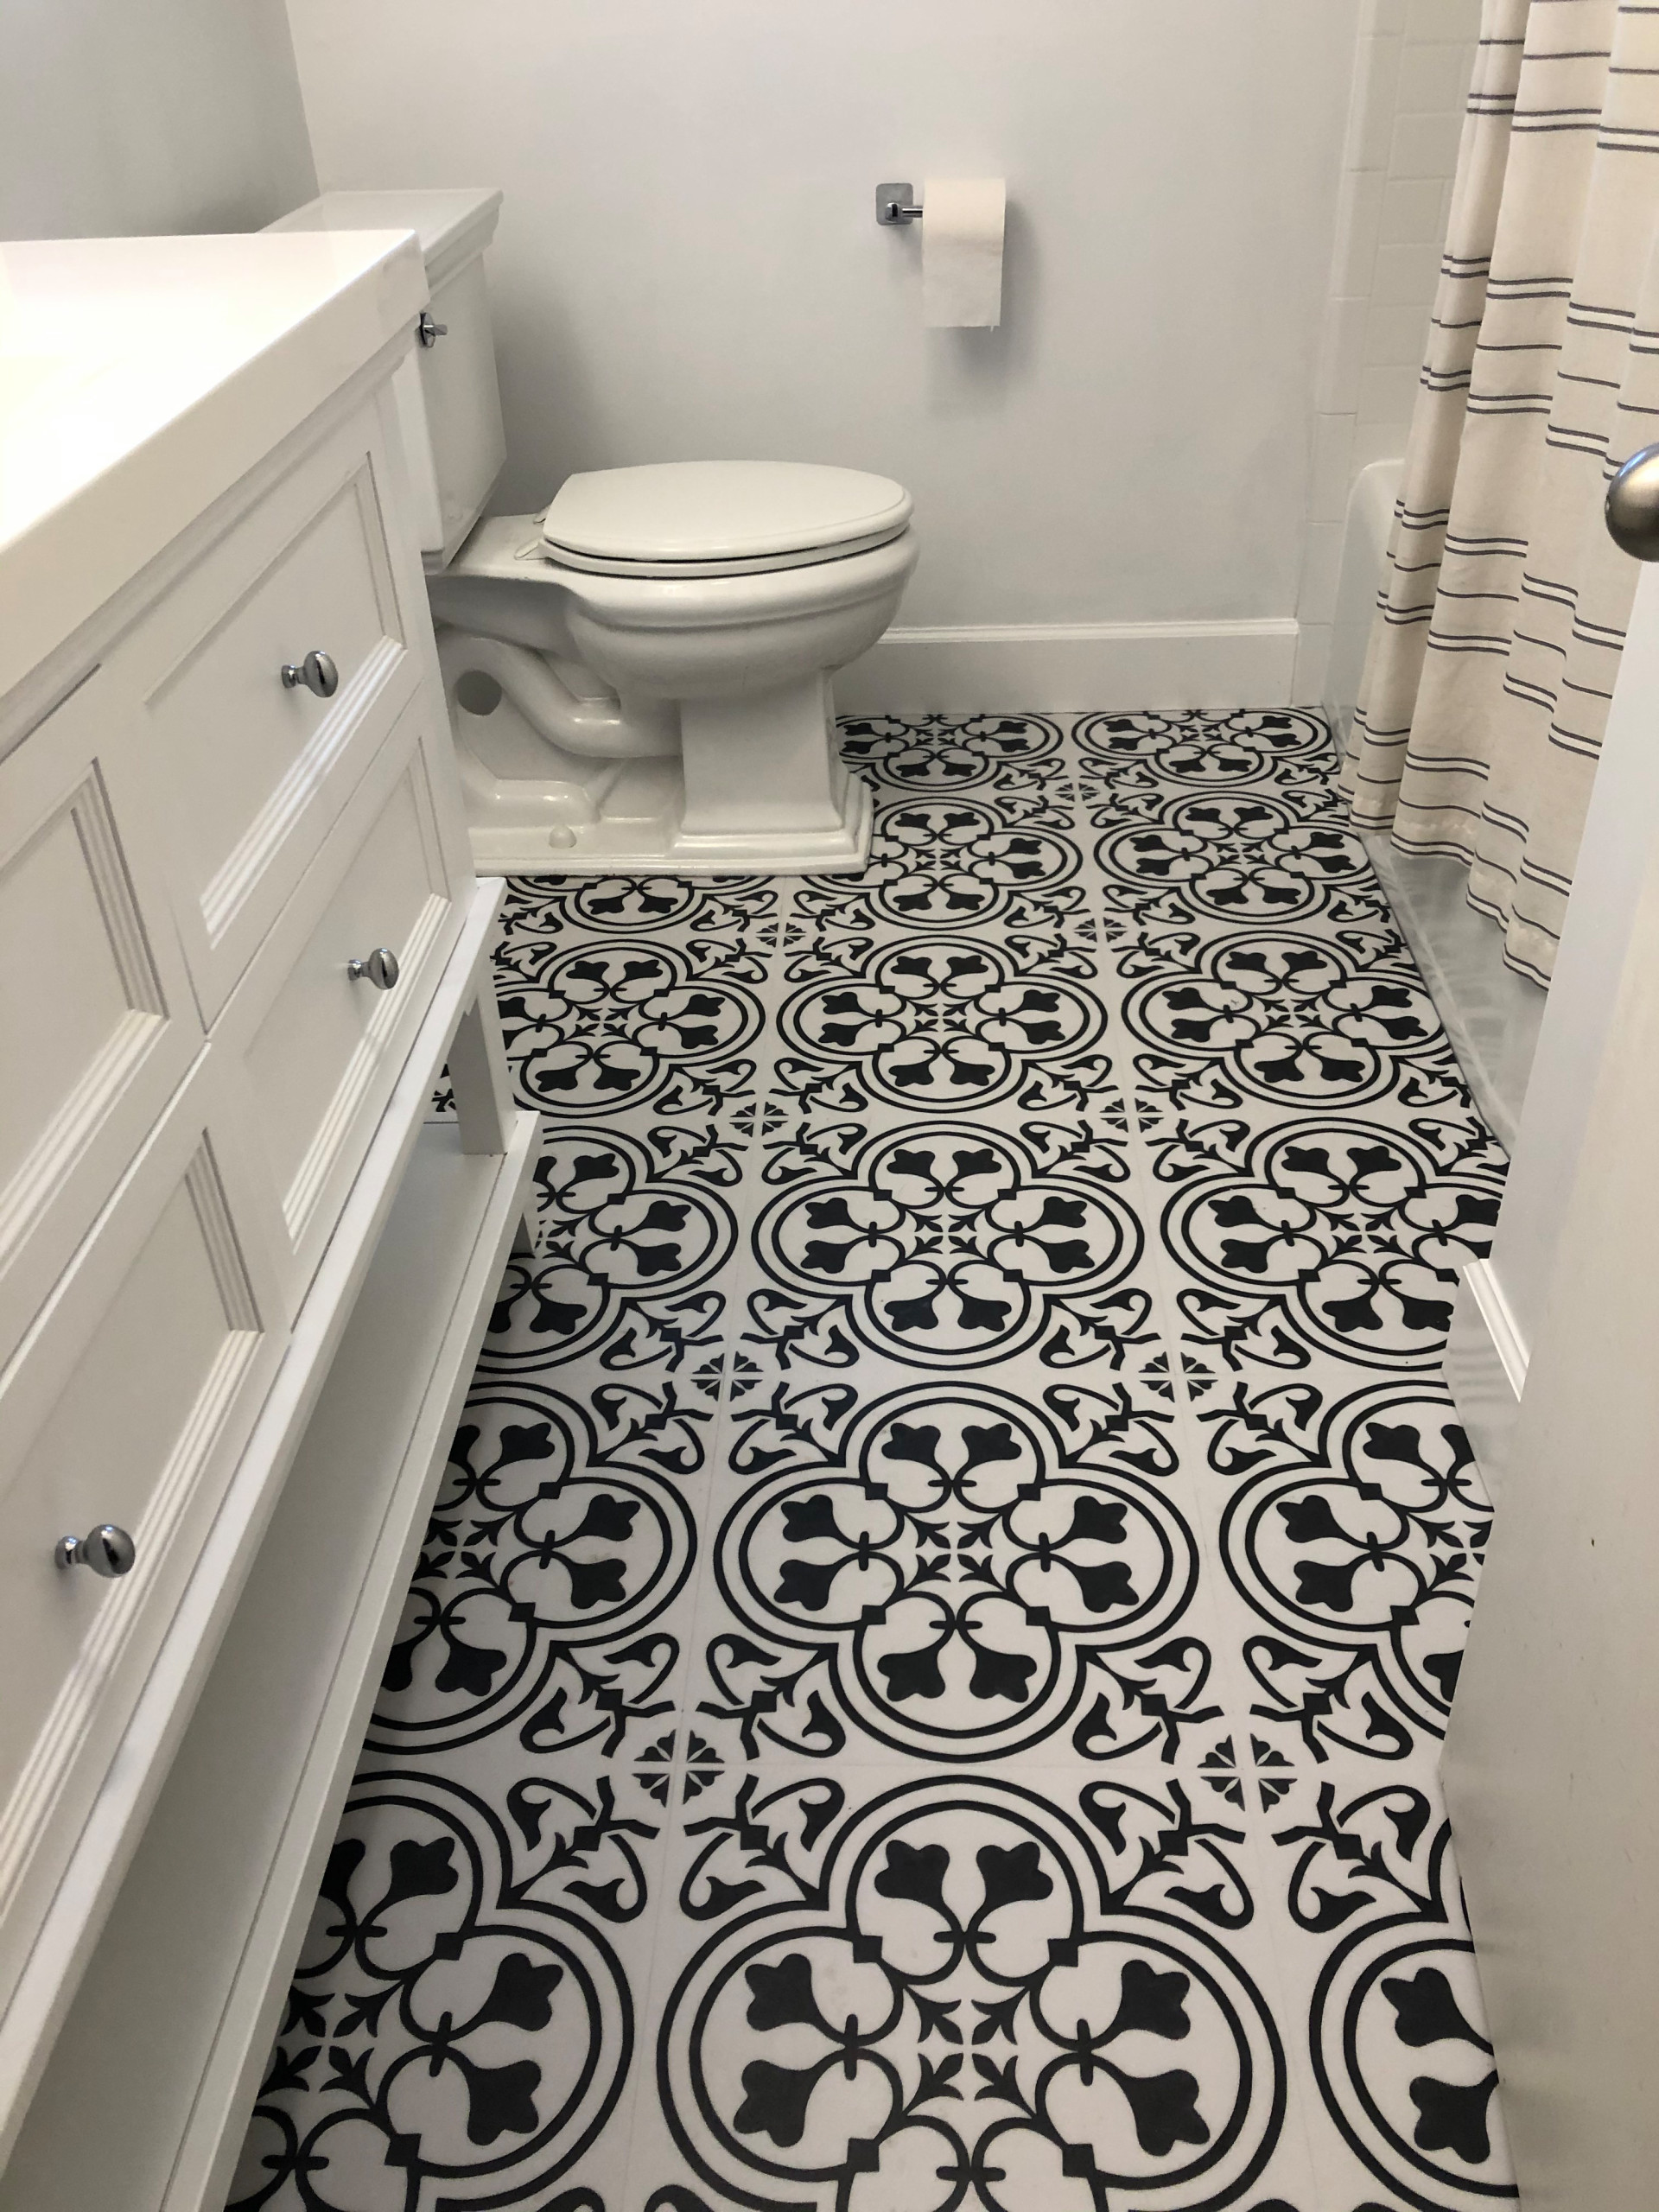 Bathroom Remodeling and Kitchen Update